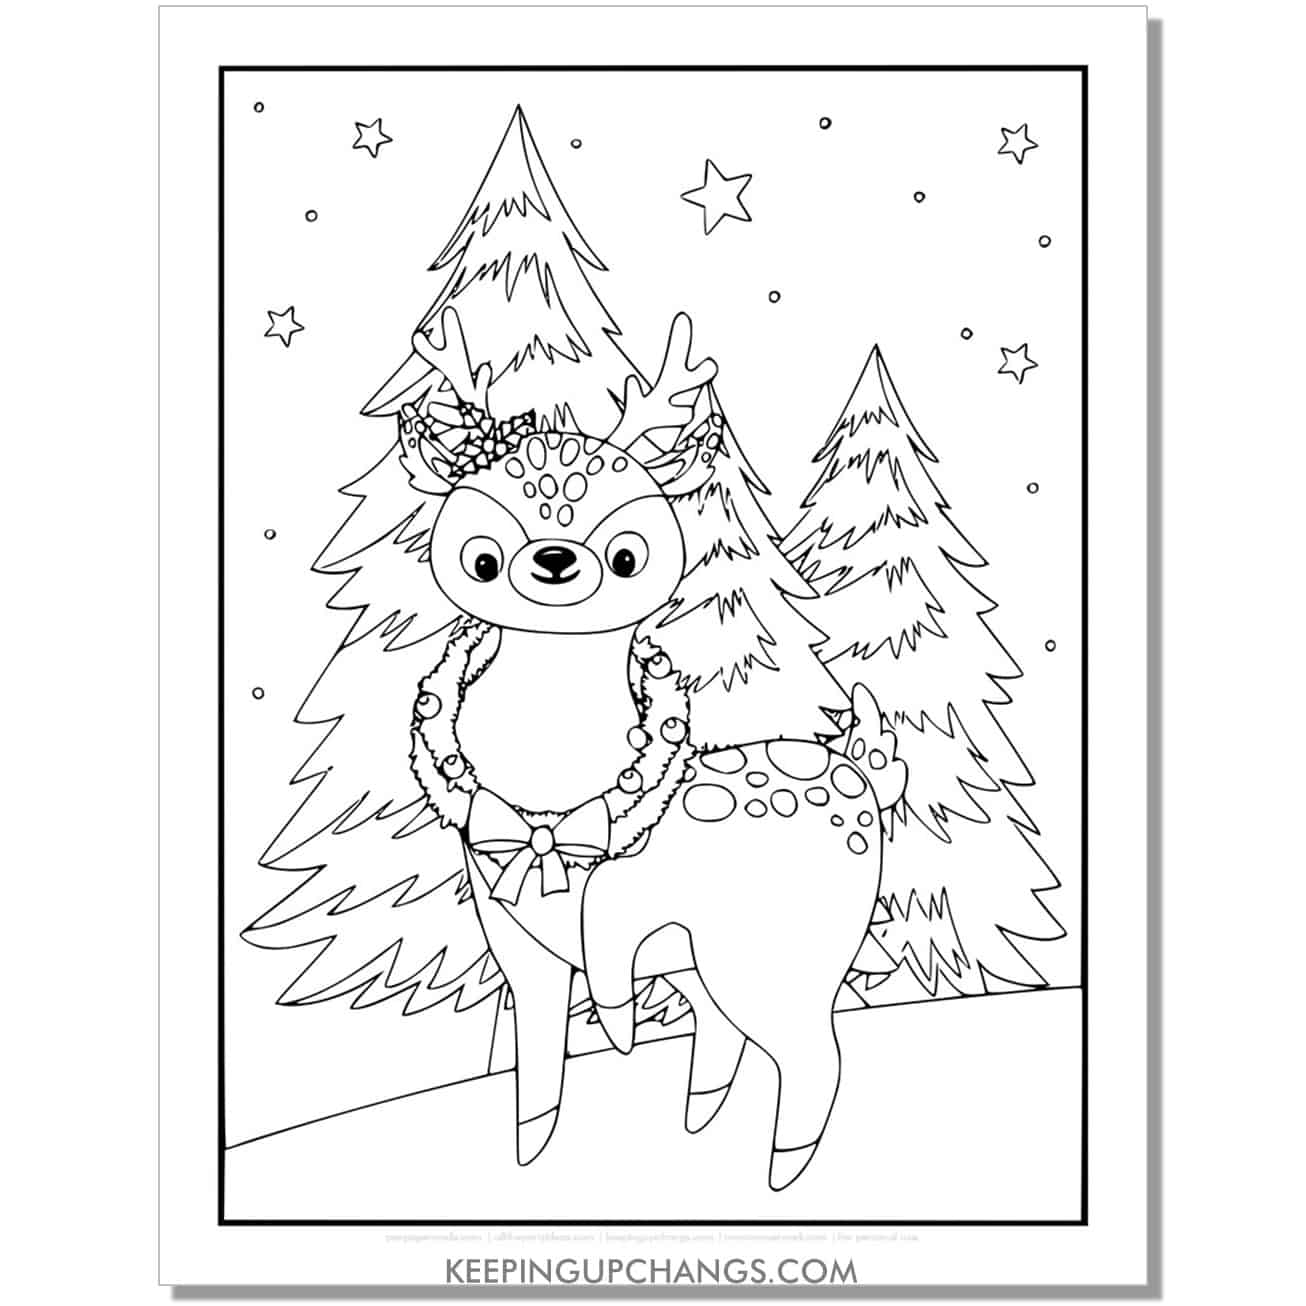 free full size reindeer with wreath around neck coloring page.